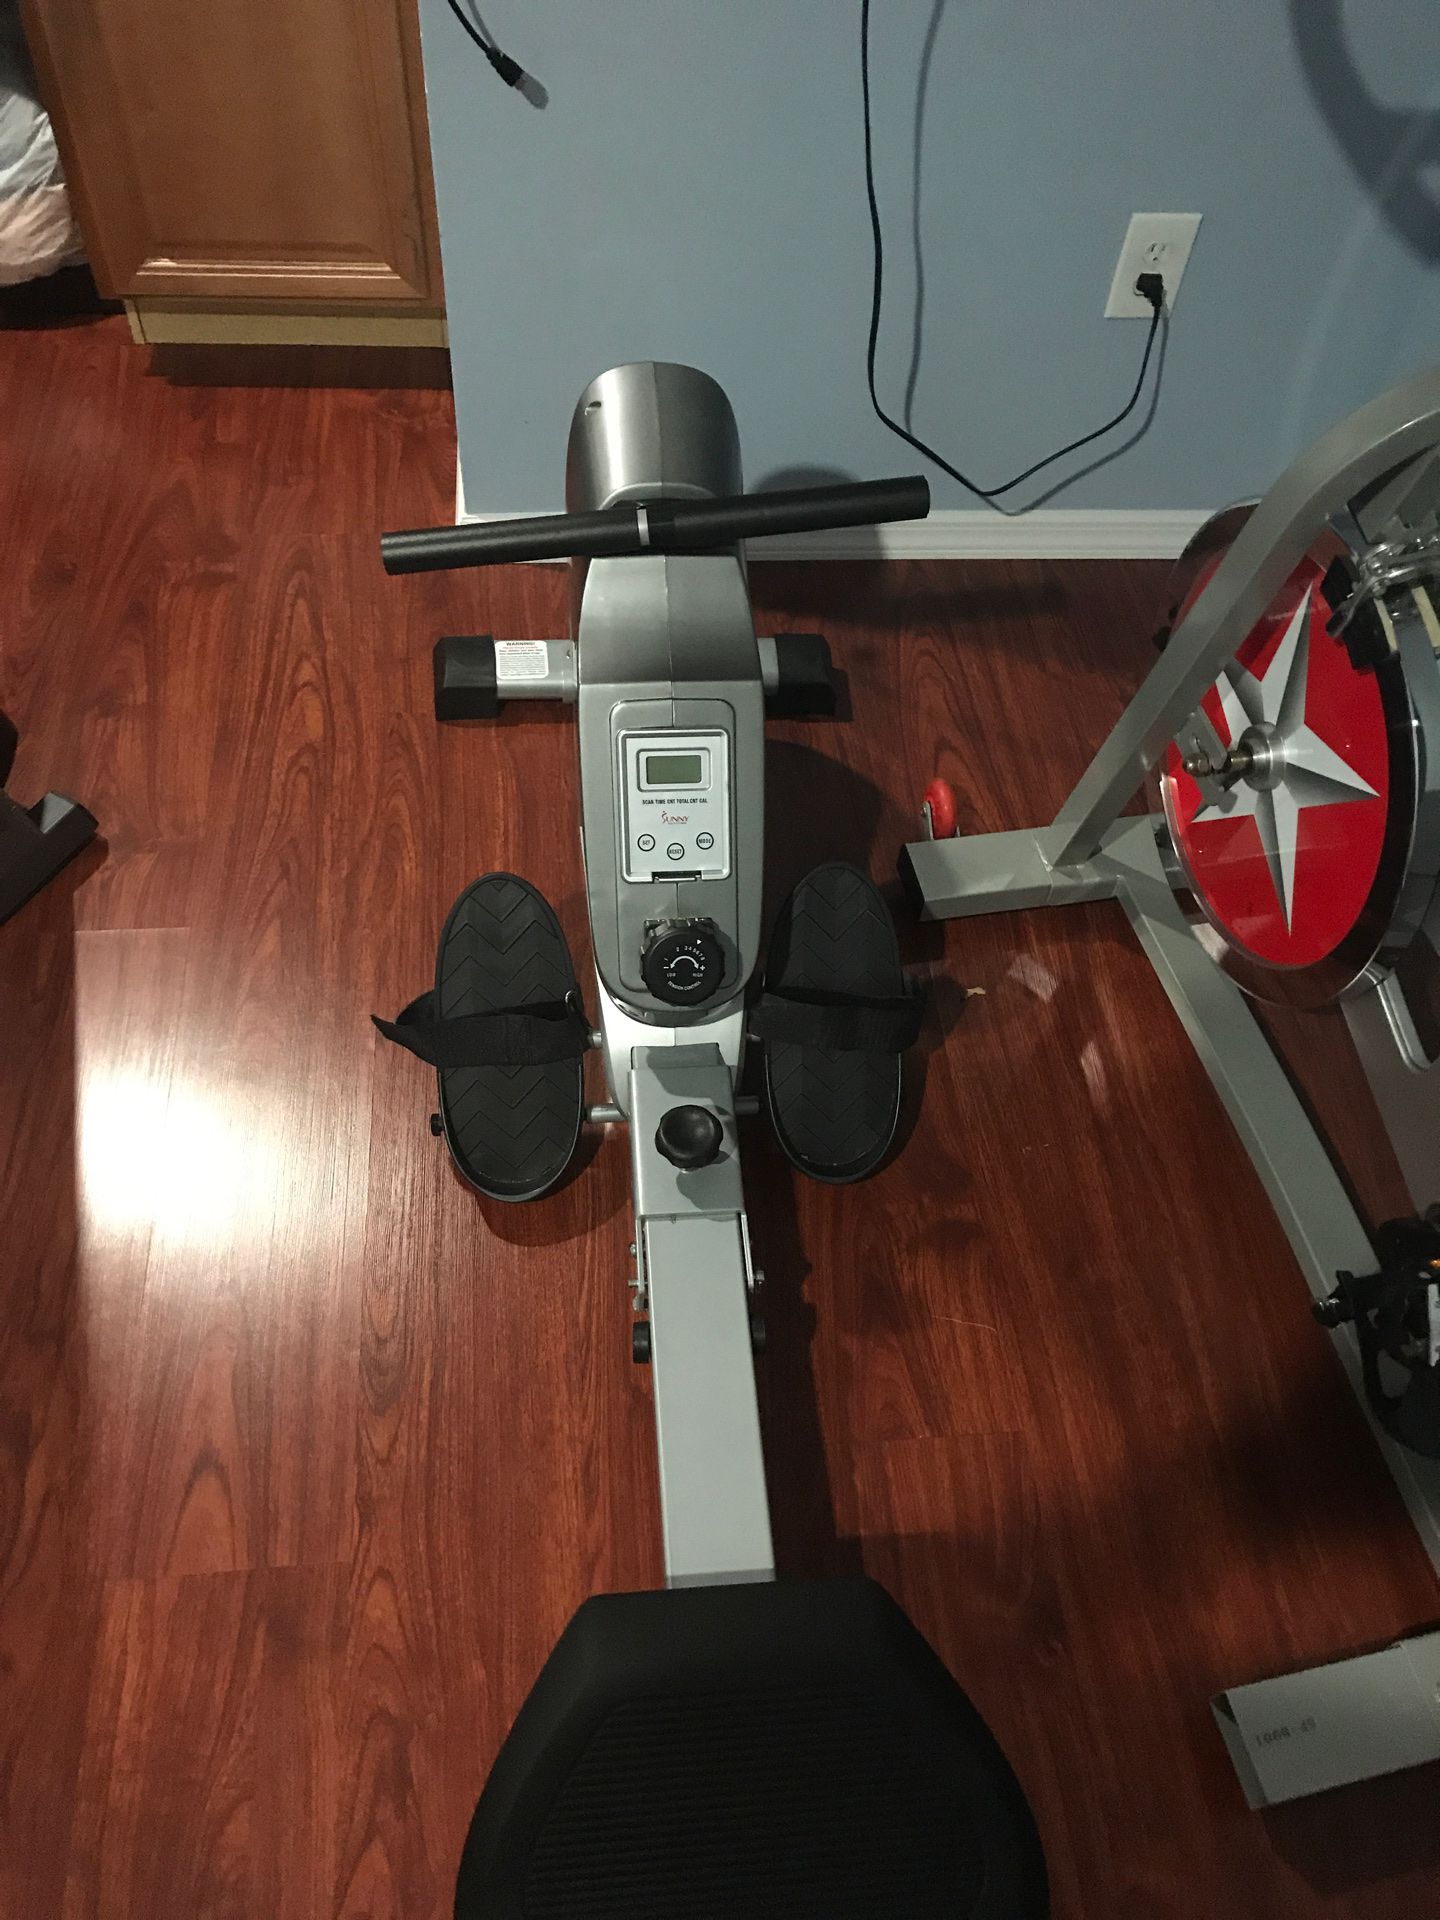 Rowing abdominal machine like new no scratches